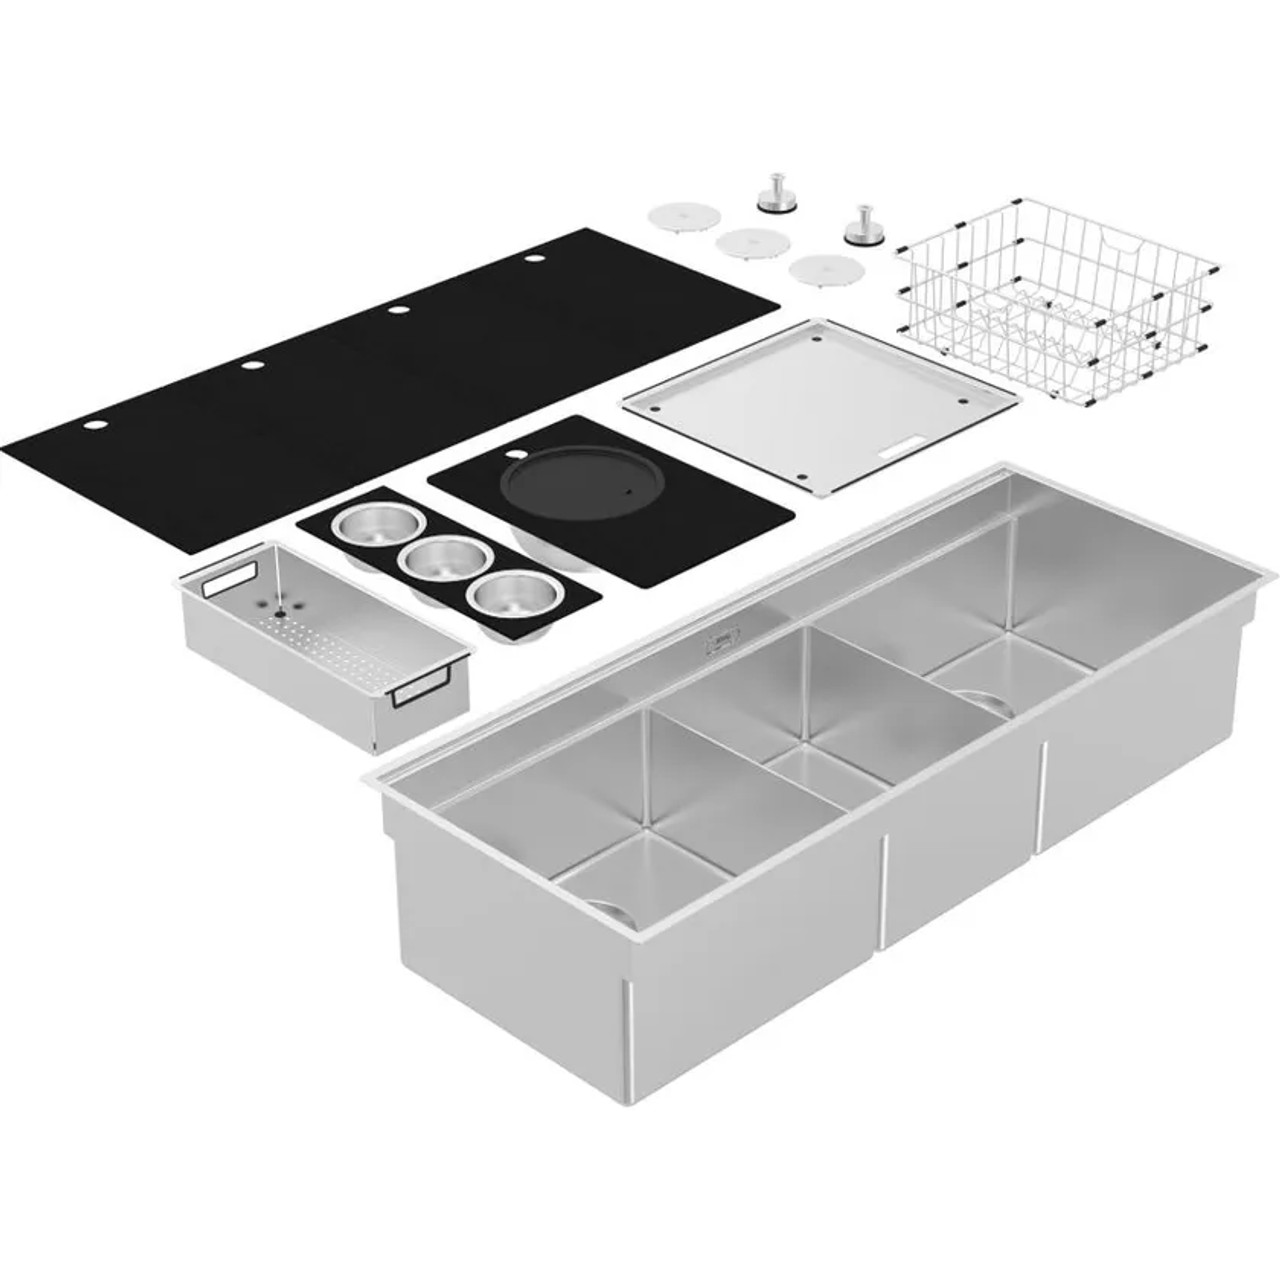 ASA05Q - Abey  Boutique Piazza Plus Triple Bowl Stainless Steel Sink - Stainless Steel